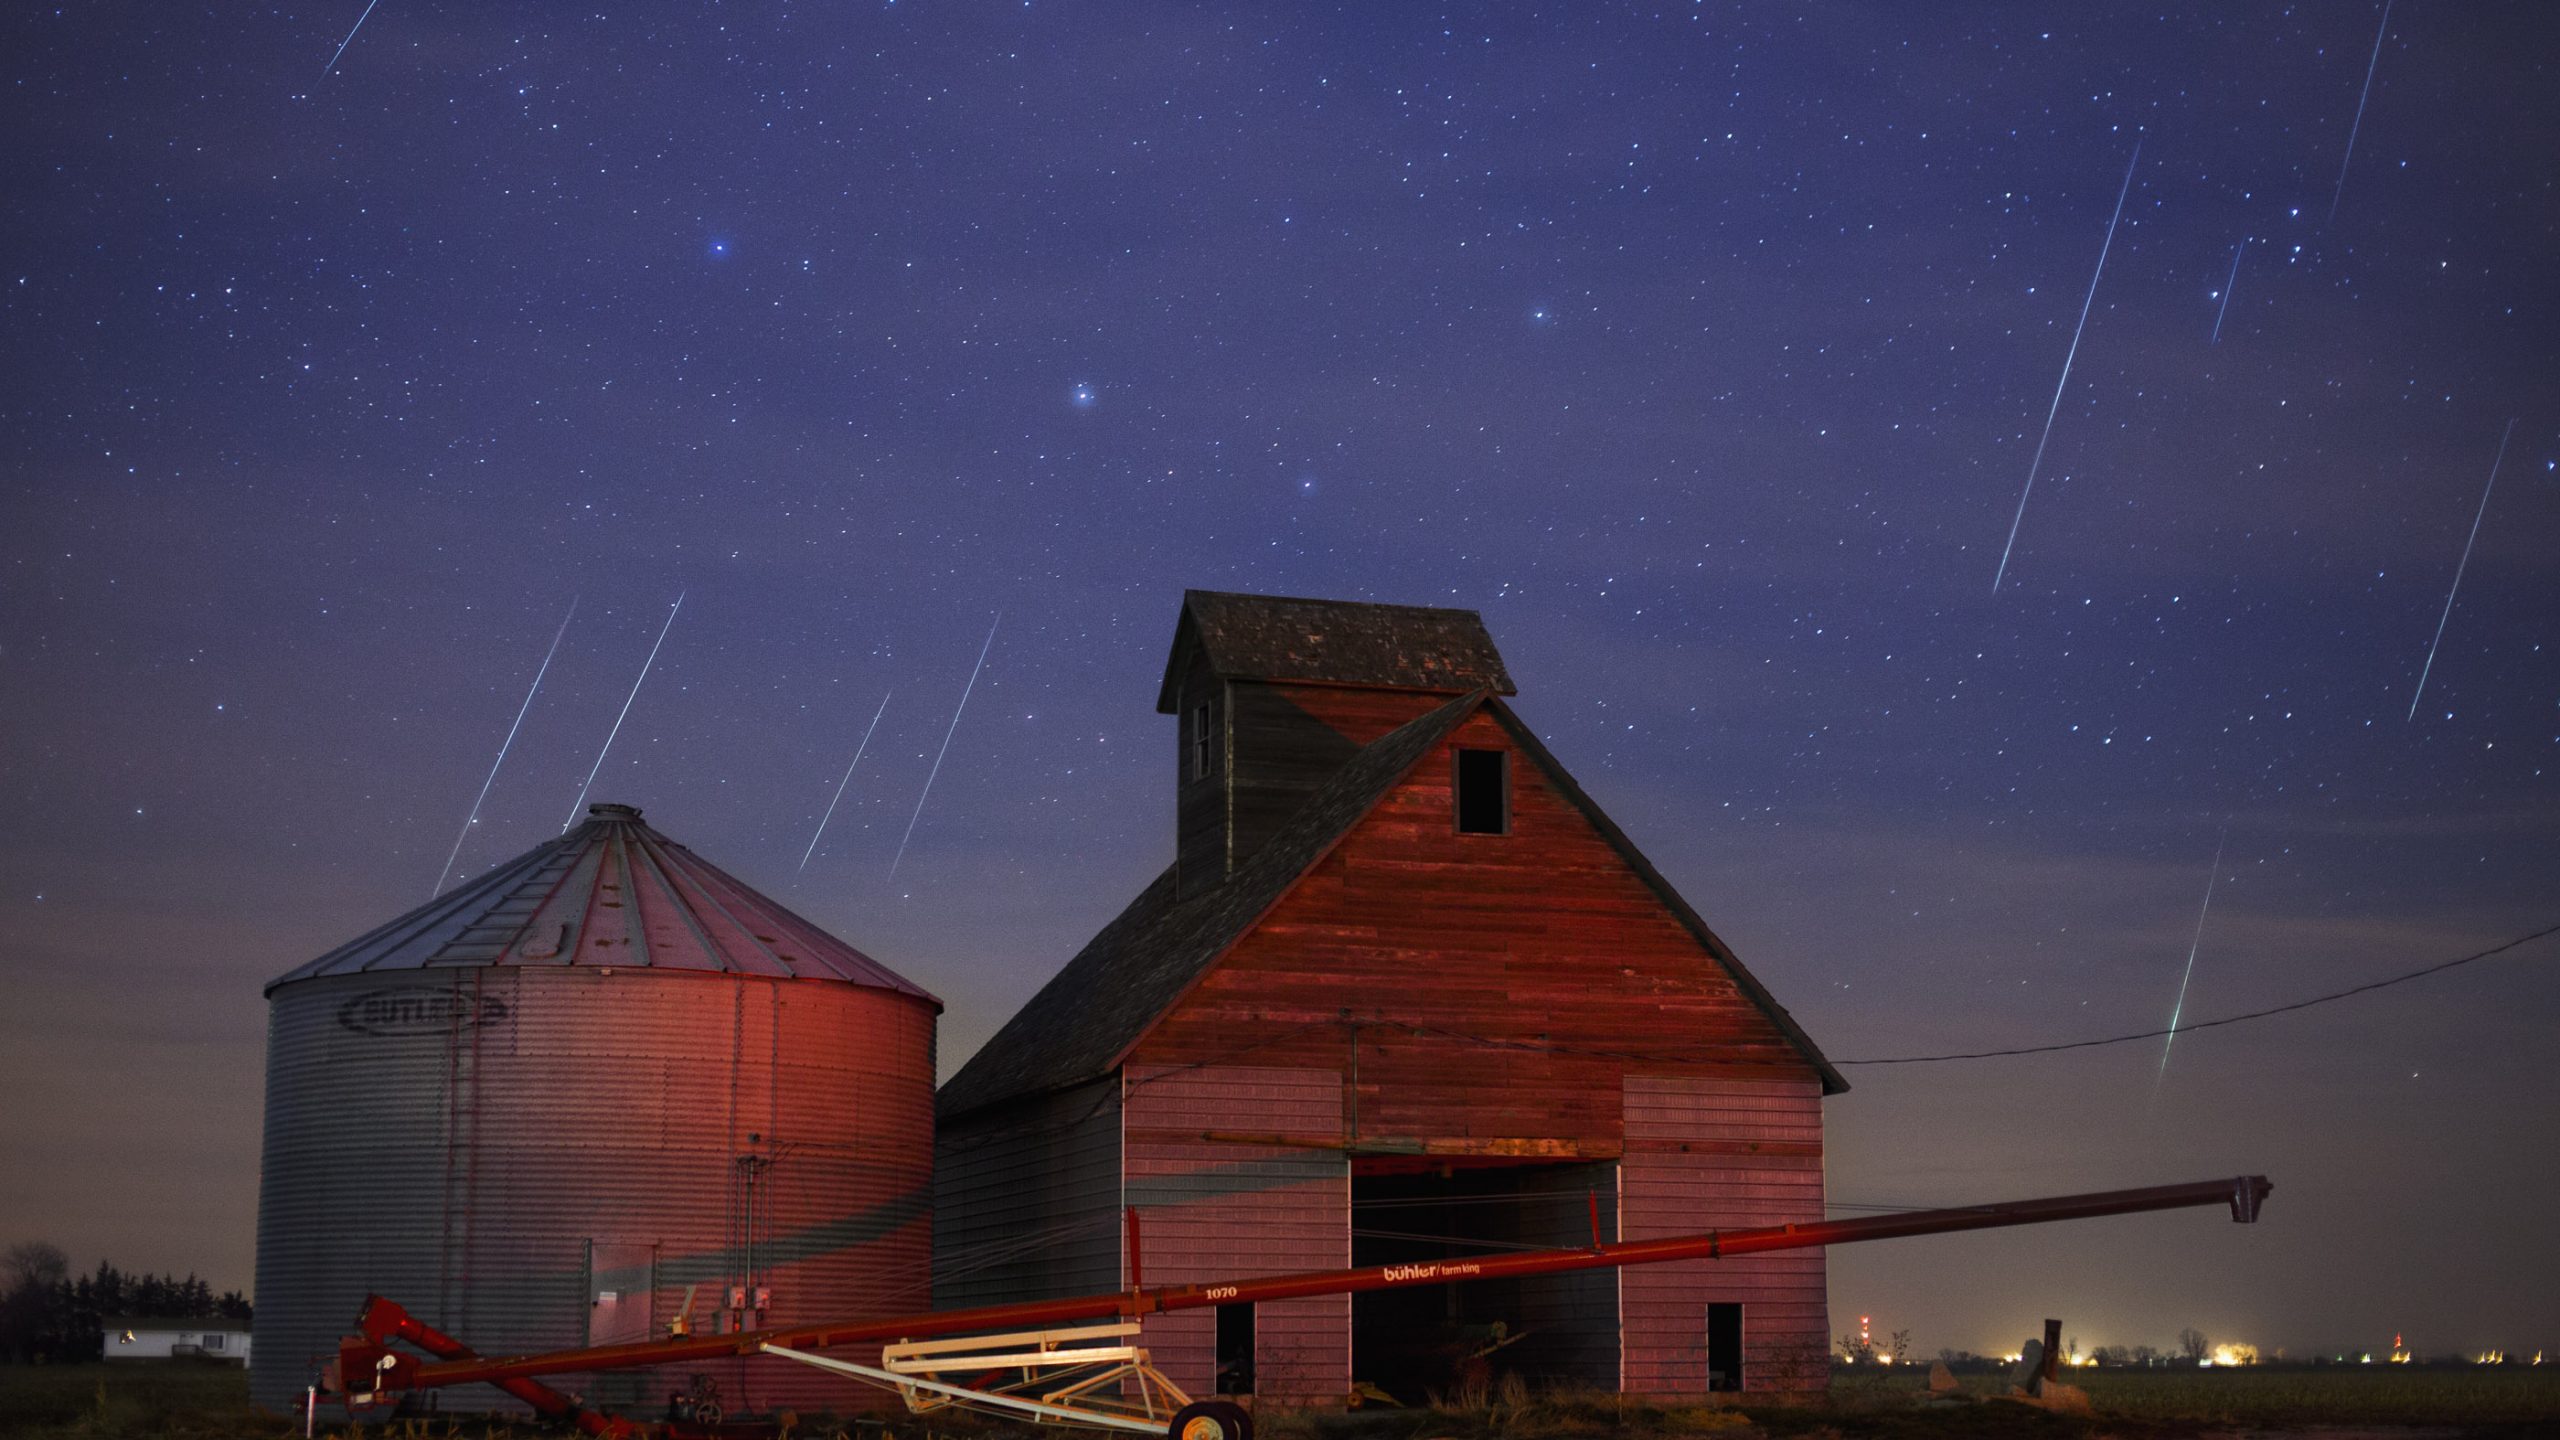 Spectacular Geminid meteor shower peaks tonight. Here's how to watch the show.